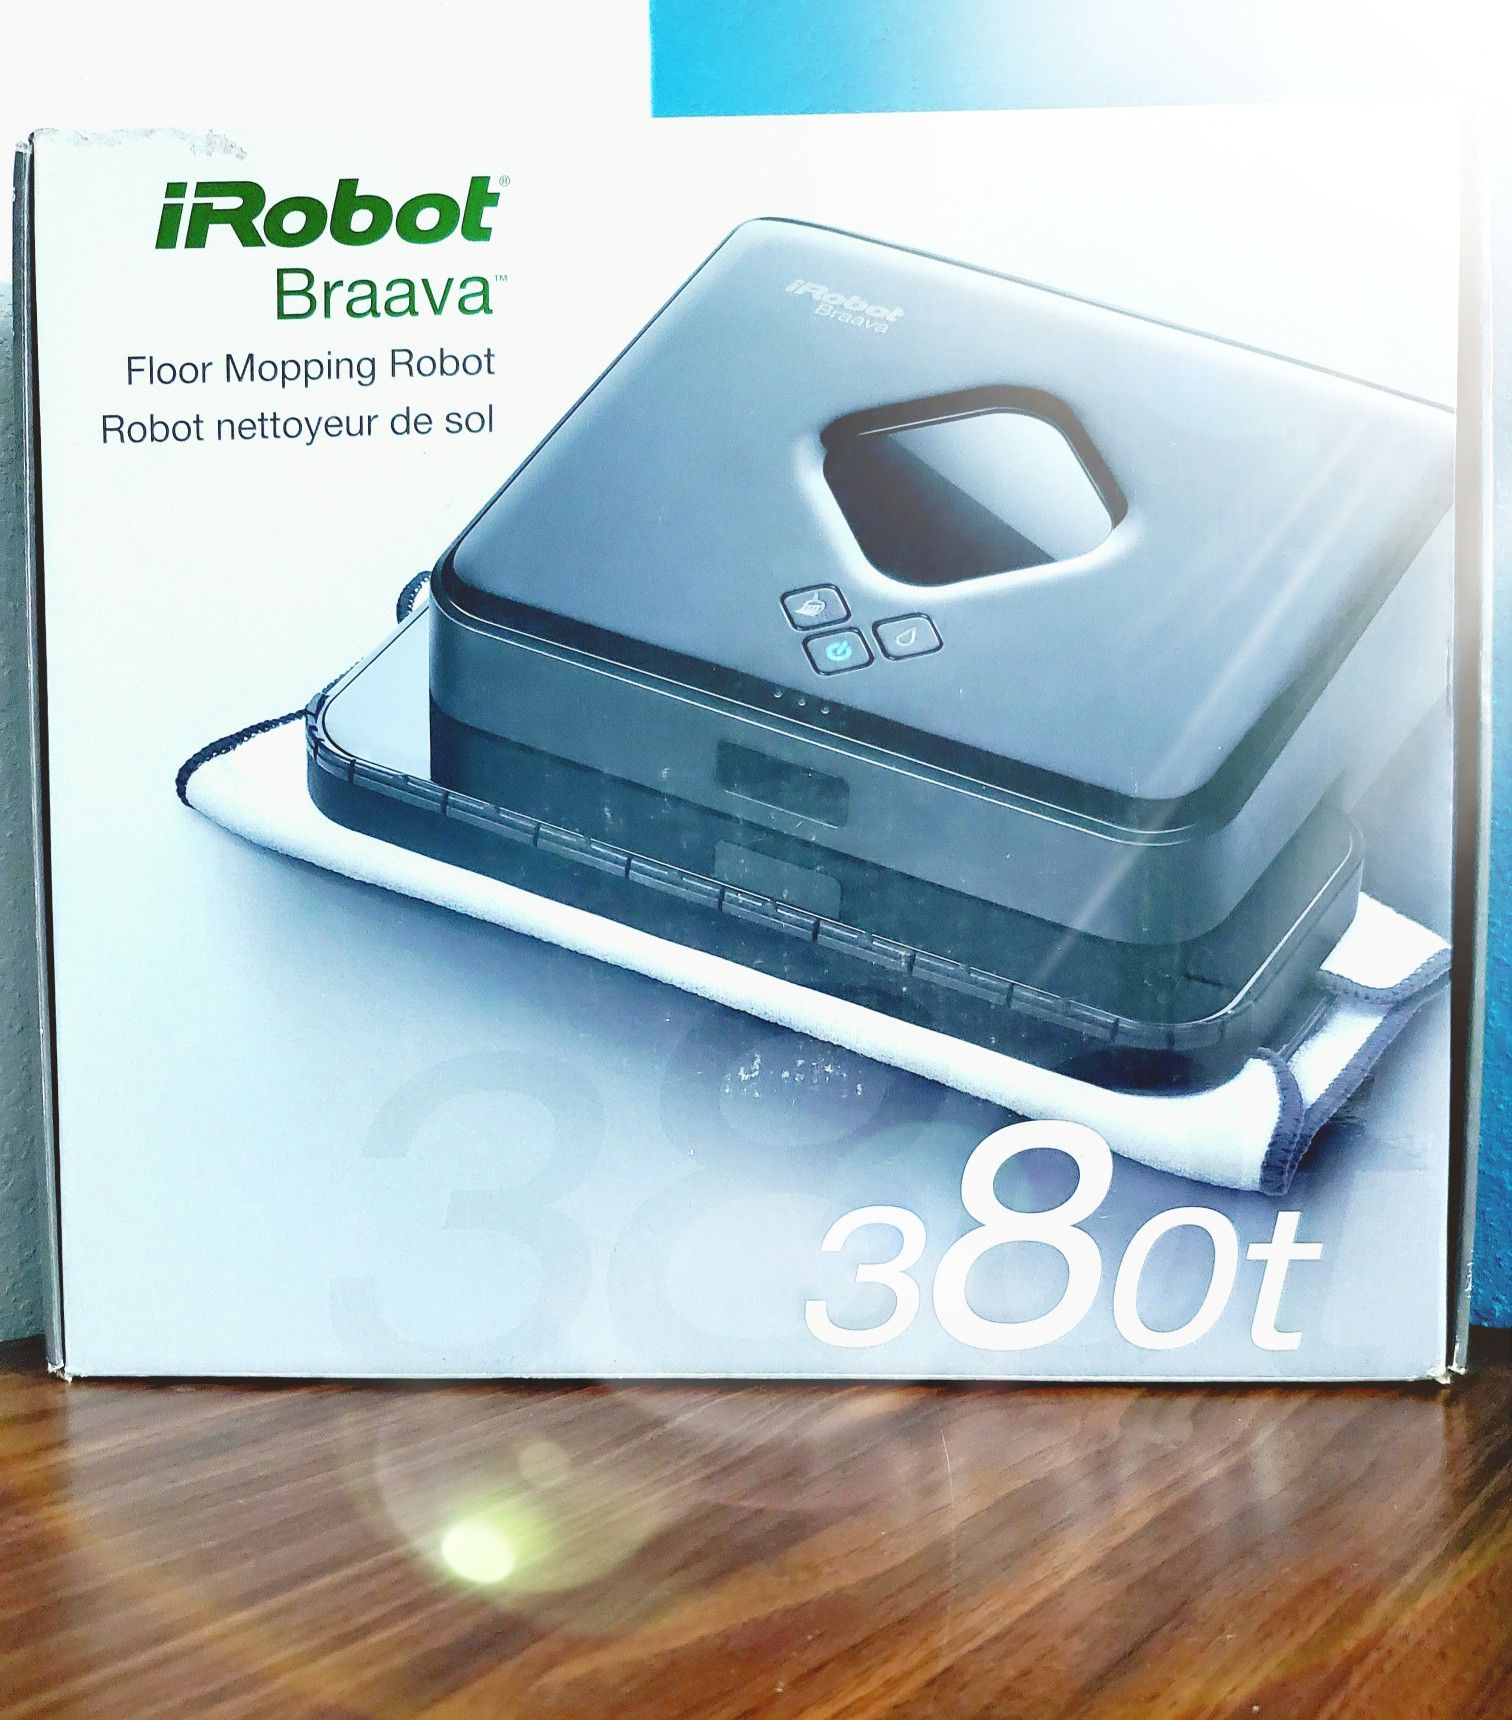 iRobot Braava 380t Advanced Robot Mop- Wet Mopping and Dry Sweeping cleaning modes, large spaces